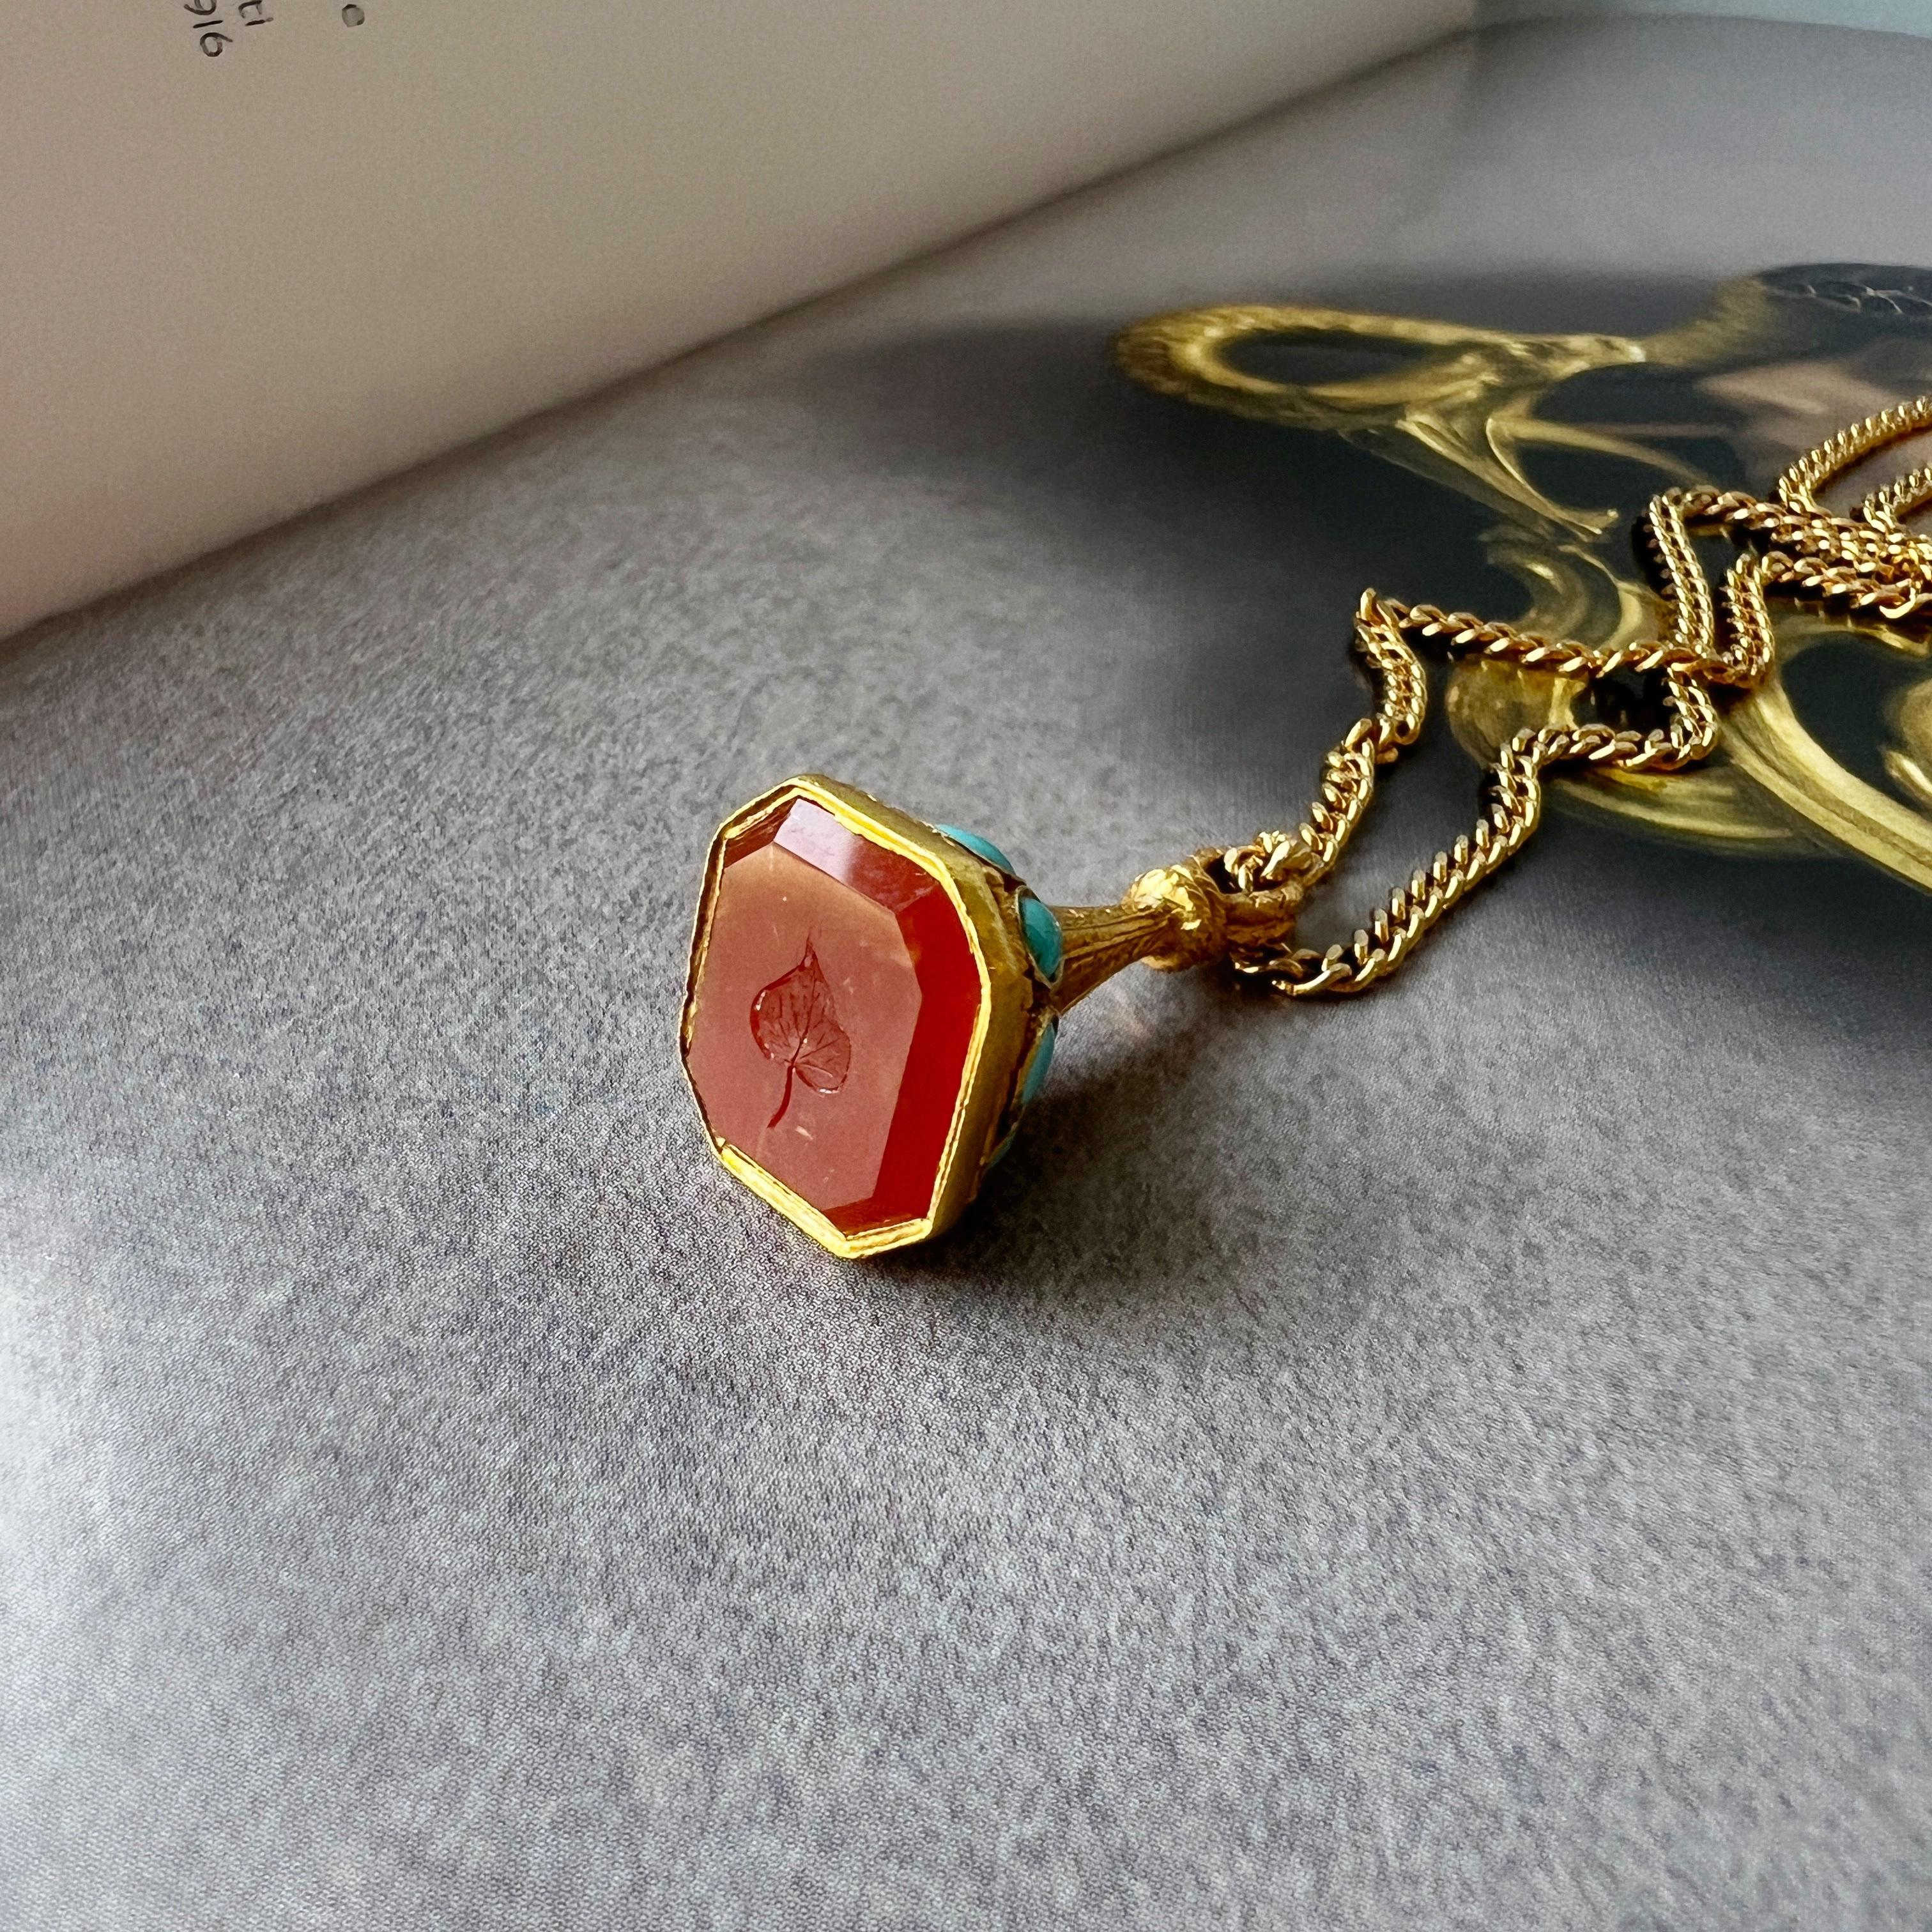 Antique 18K gold turquoise carnelian seal fob pendant “as free as a leaf” For Sale 2